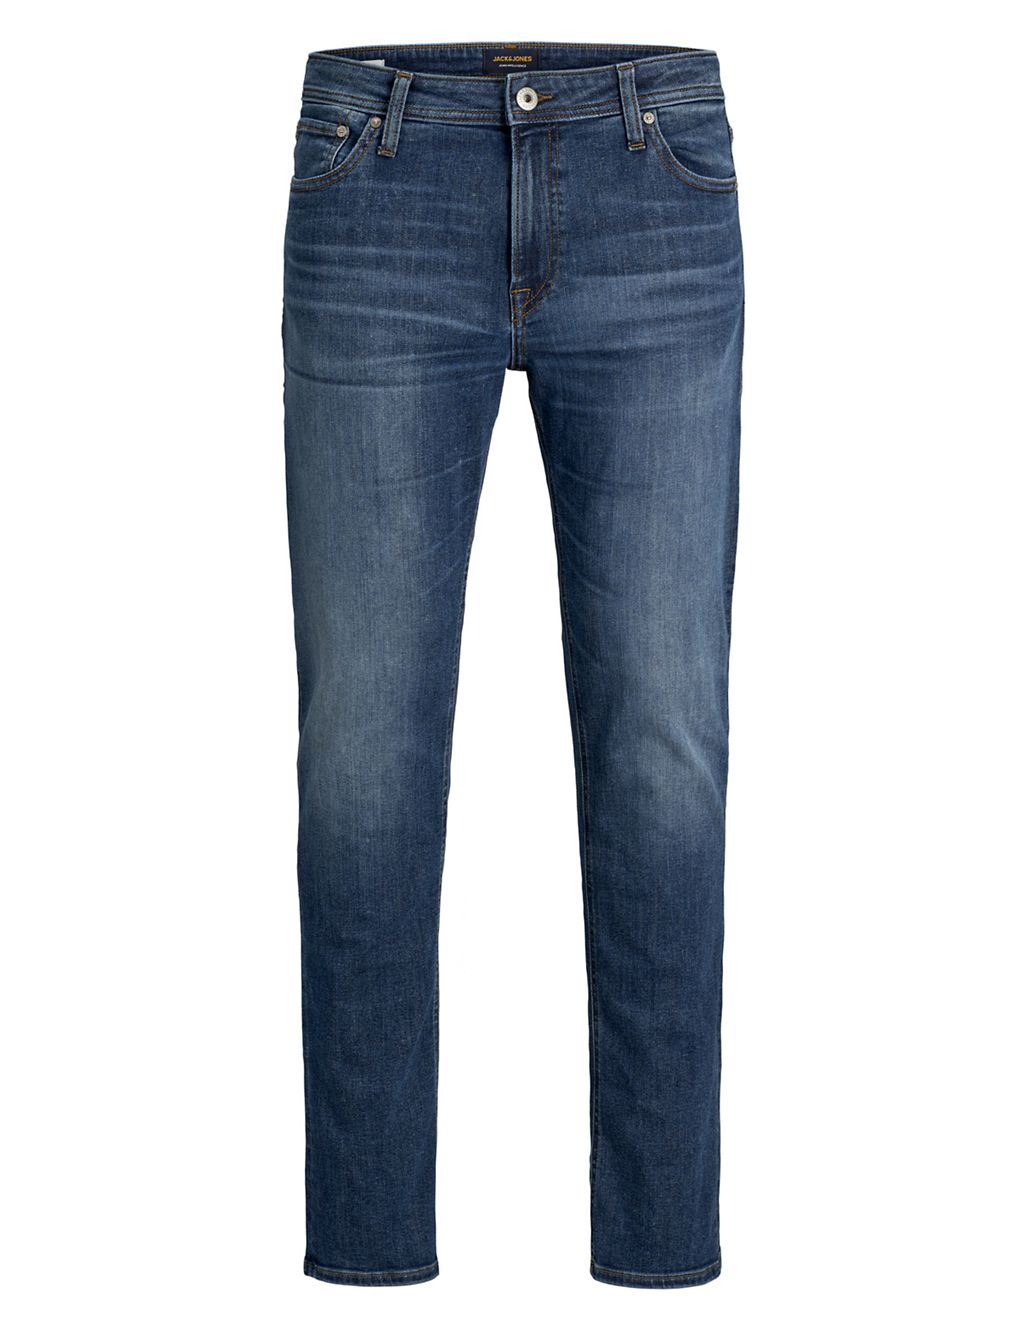 Slim Fit Stretch Jeans 1 of 7